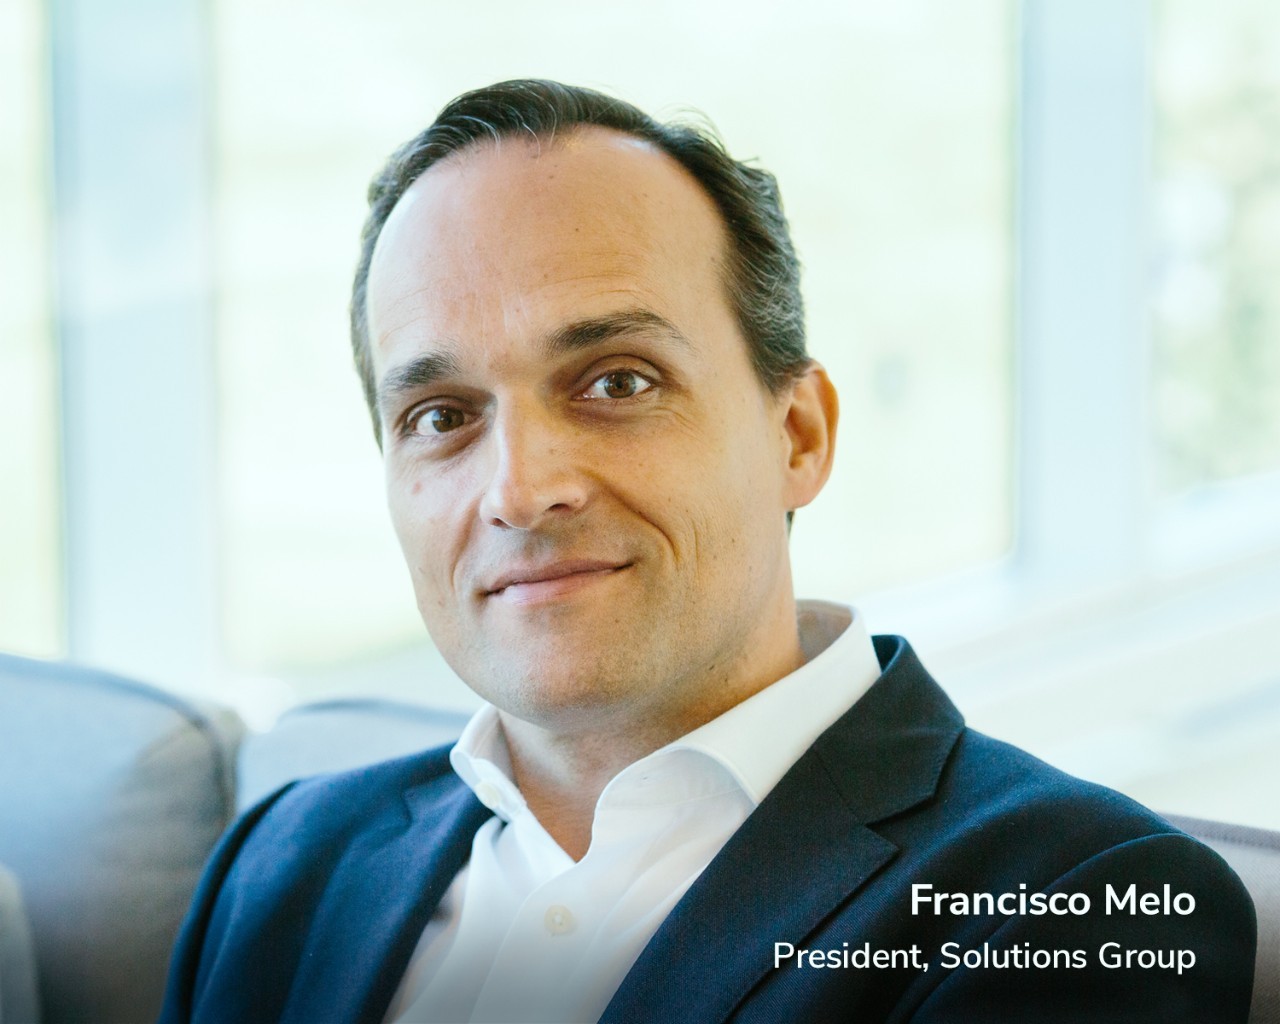 Avery Dennison Names Hassan Rmaile and Francisco Melo as Presidents for Its Two Business Segments